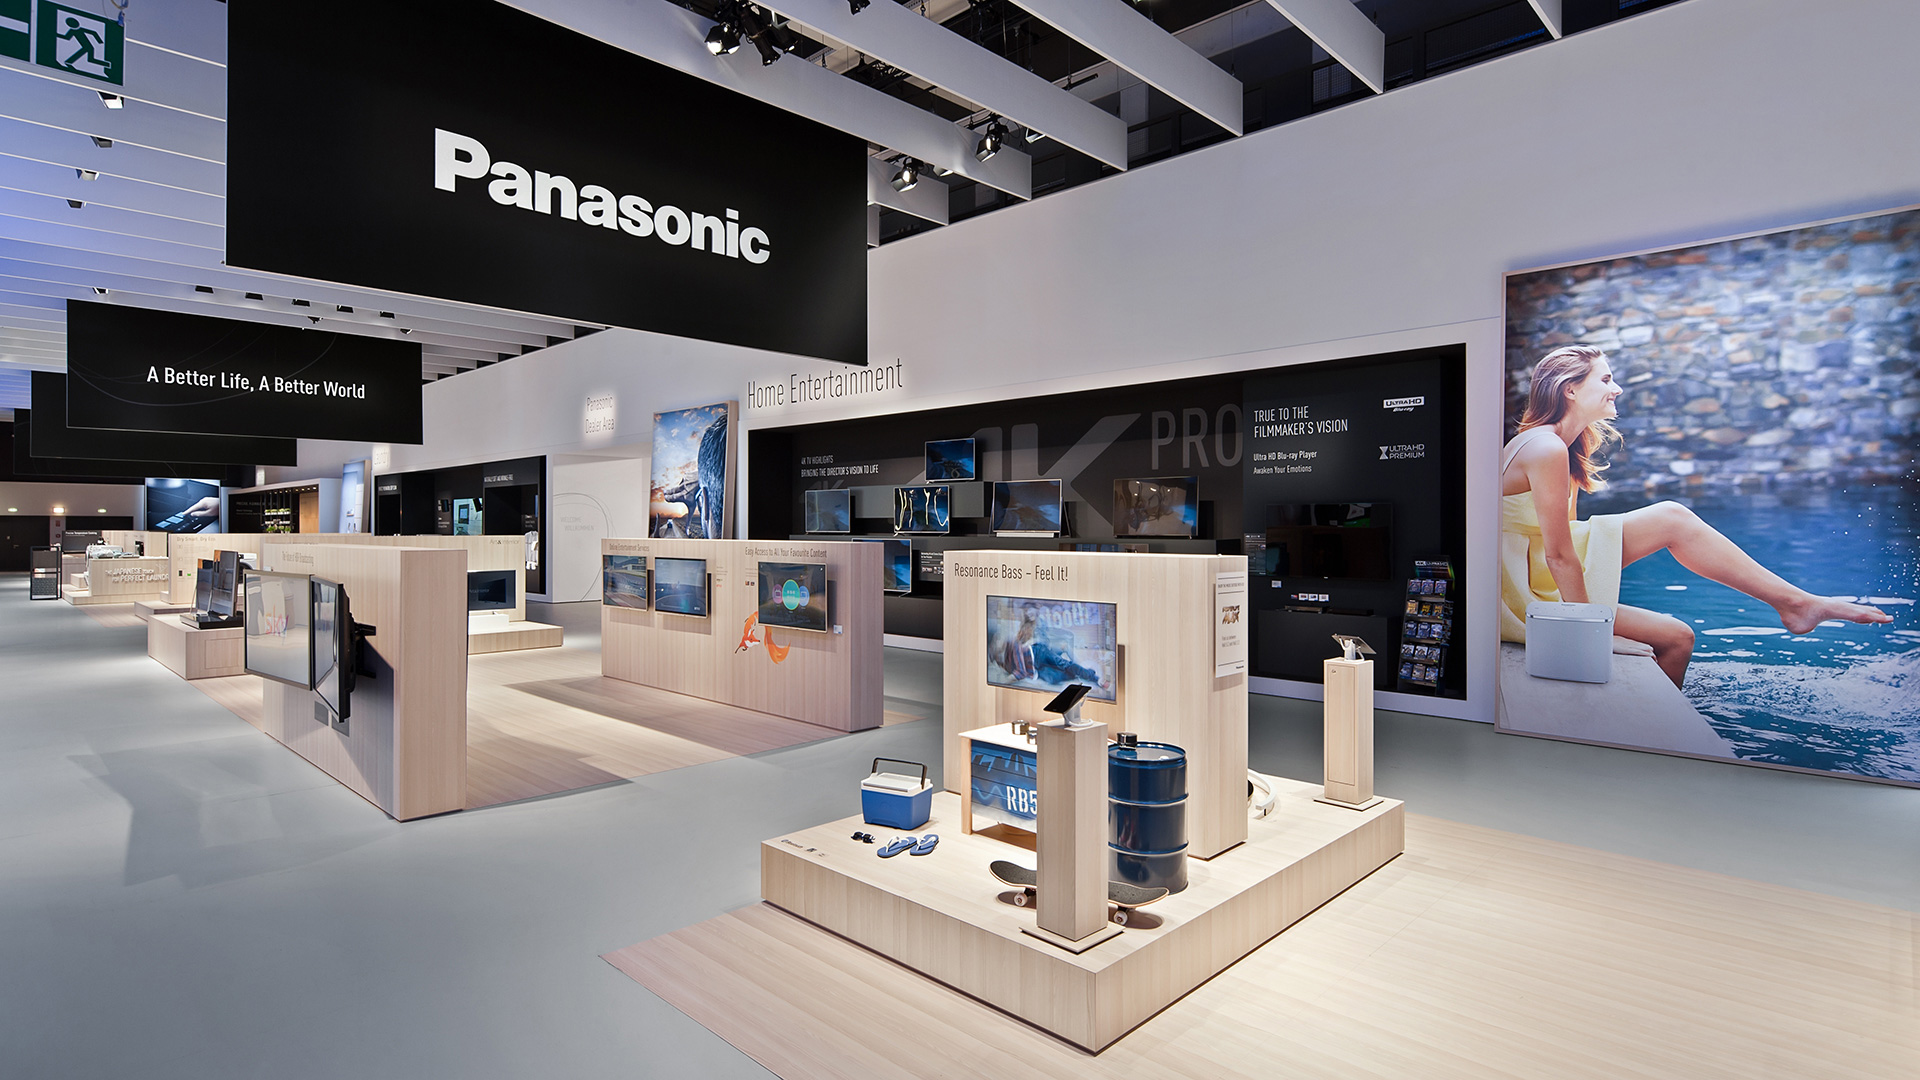 Dart stages the Panasonic fair stand at the IFA 2016